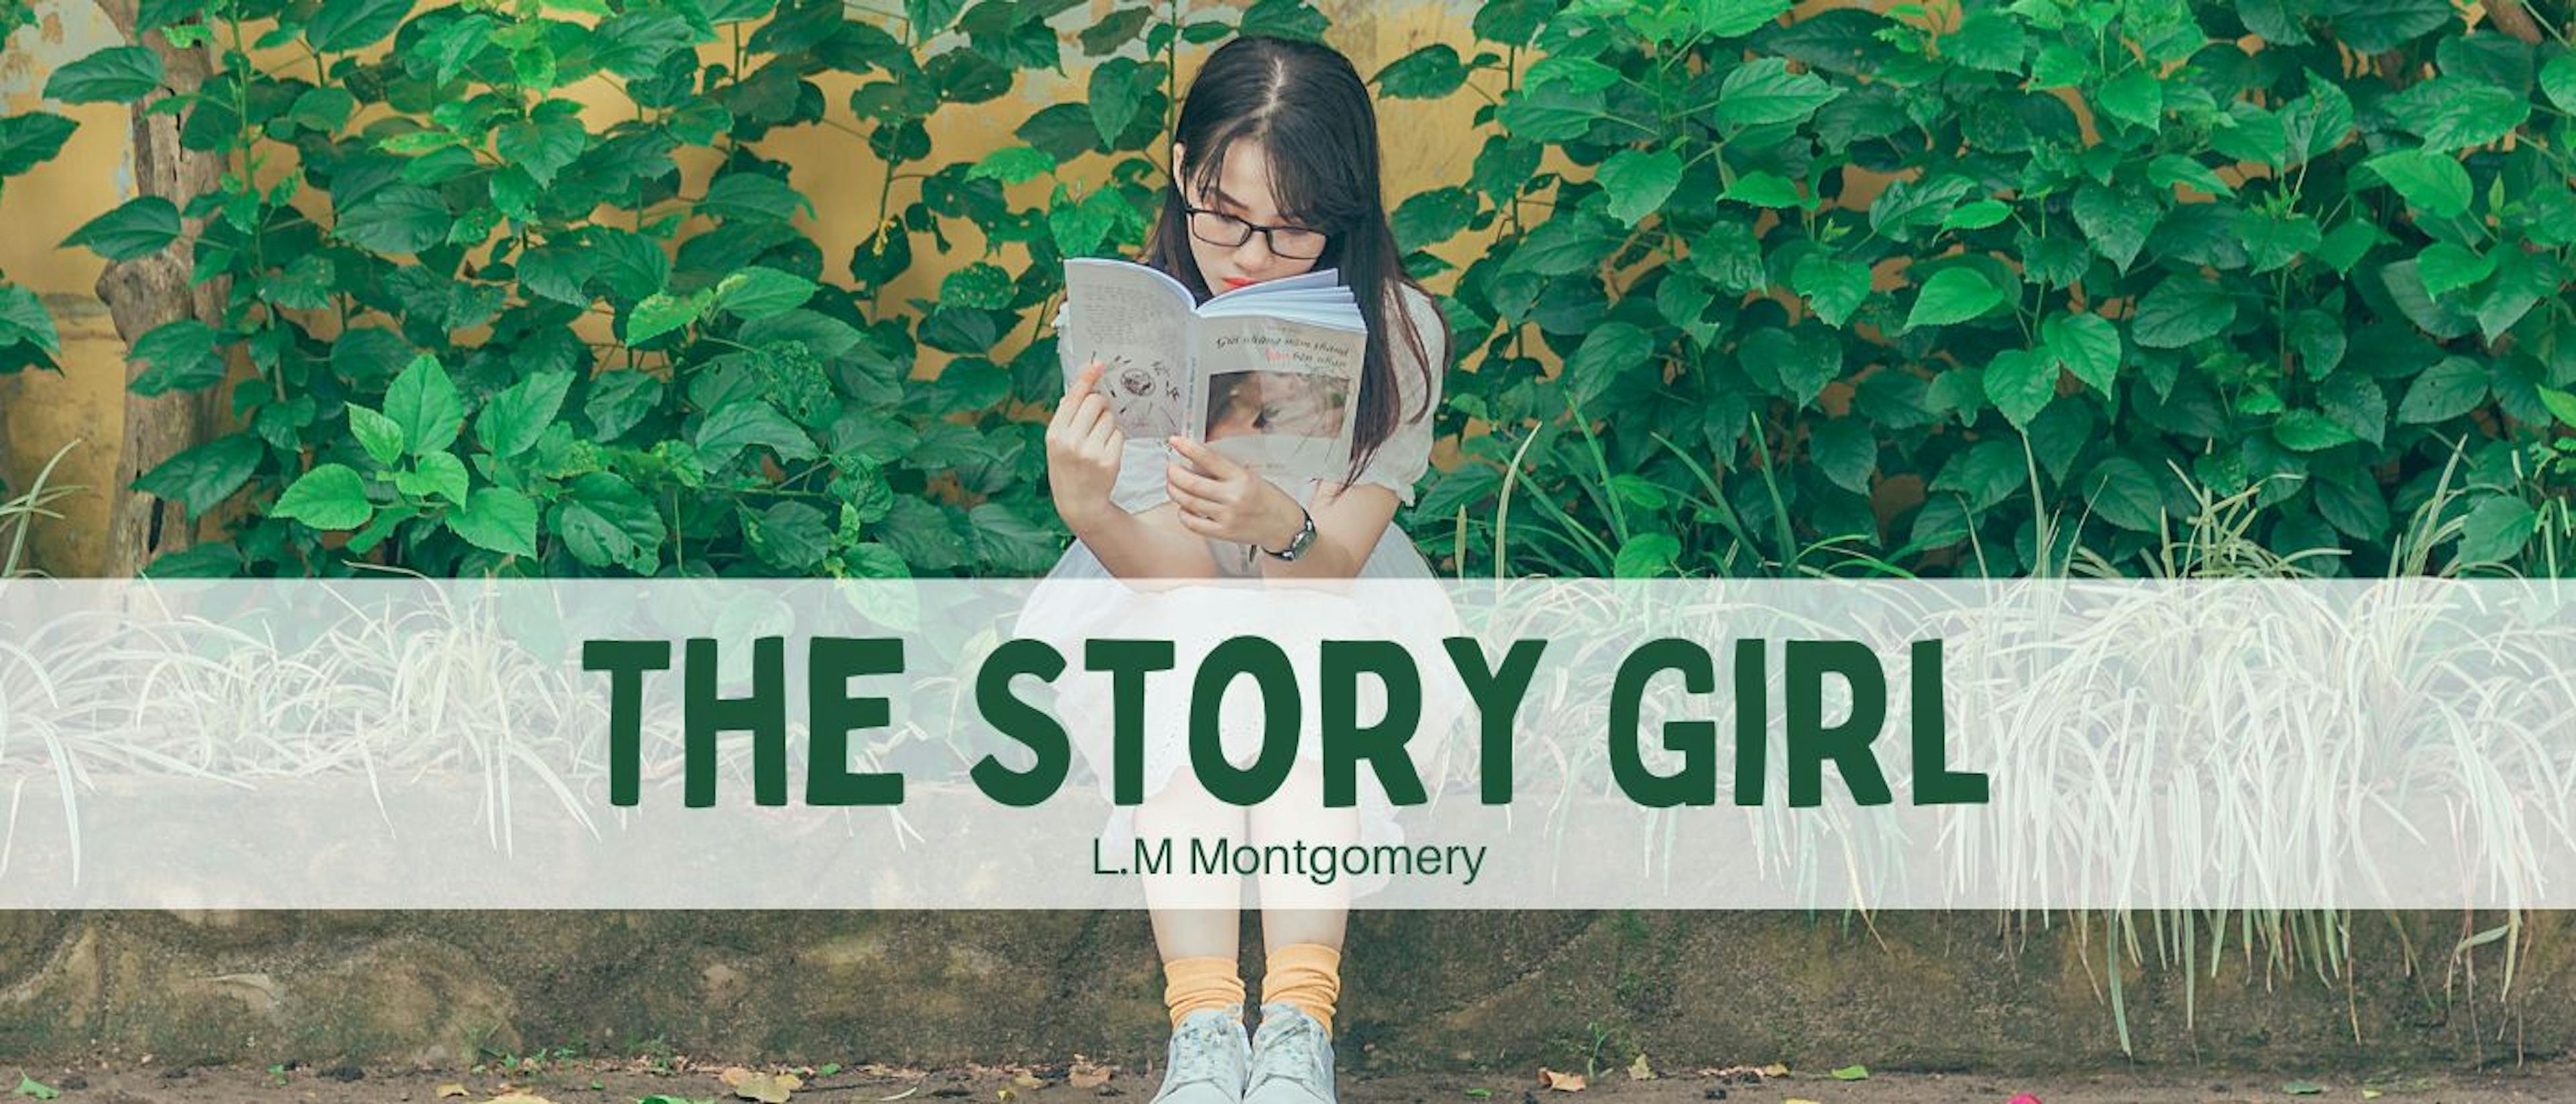 featured image - The Story Girl by L. M. Montgomery - Table of Links